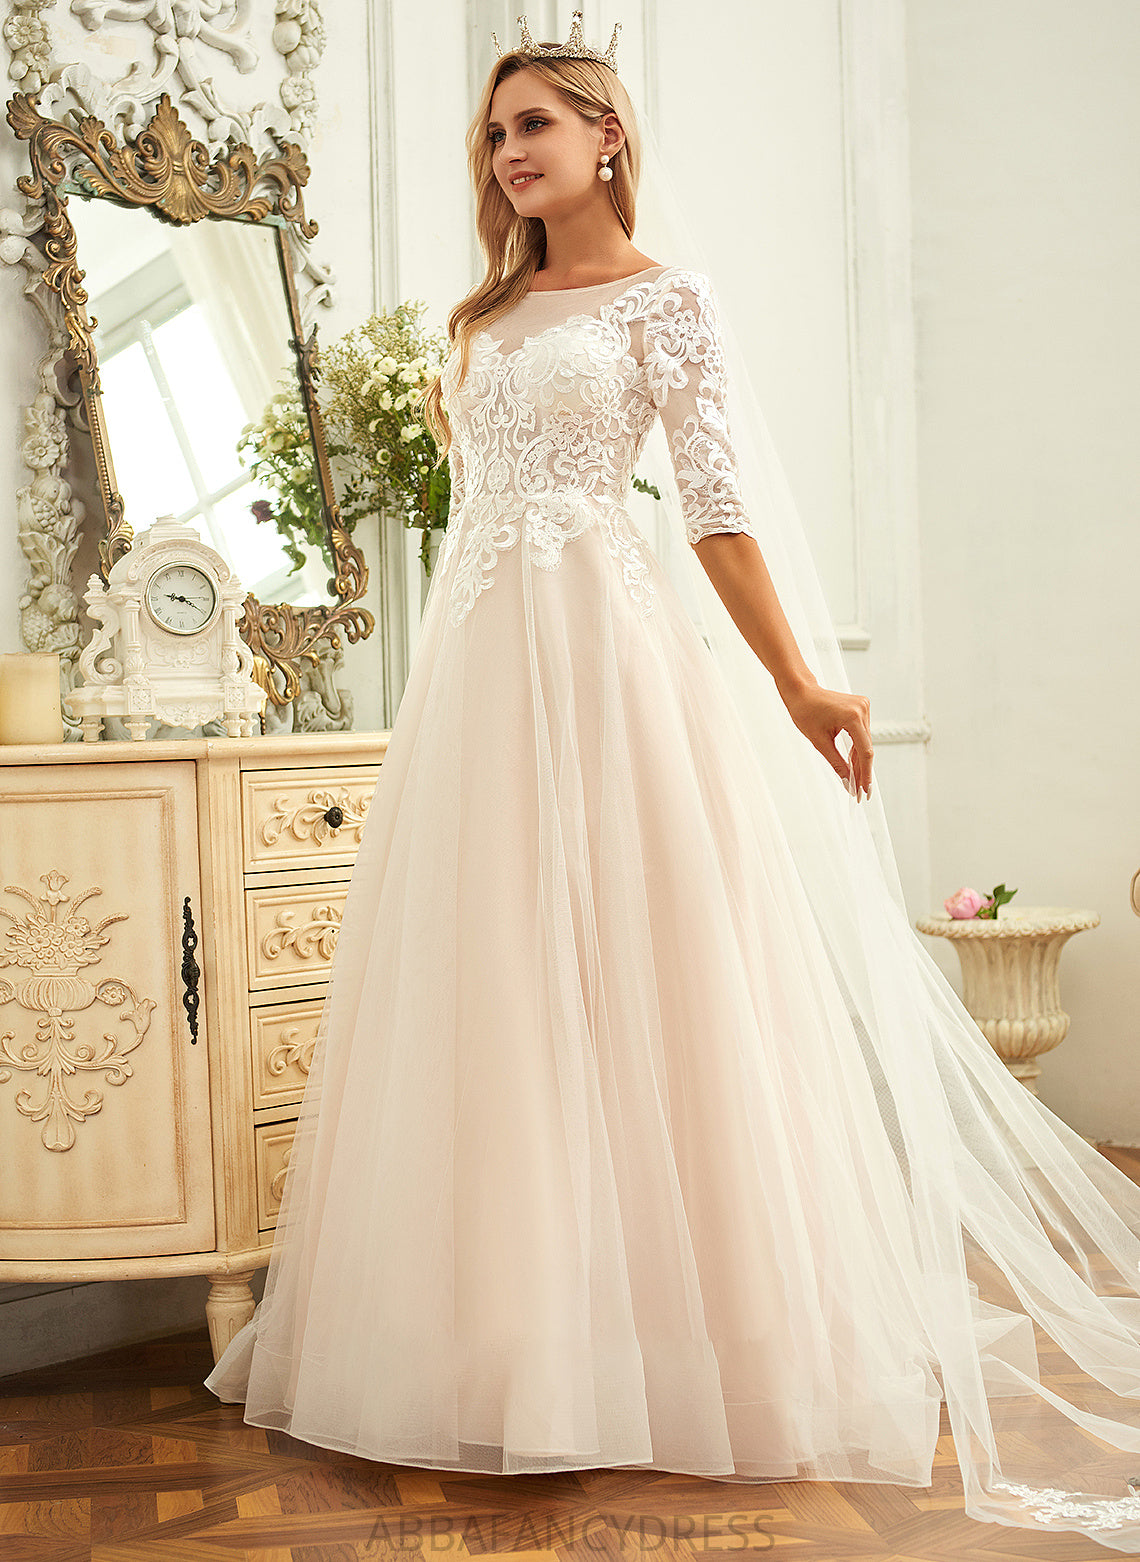 Neck Dress Ball-Gown/Princess Tulle Lace Wedding Dresses Carley Train Wedding Scoop Sweep